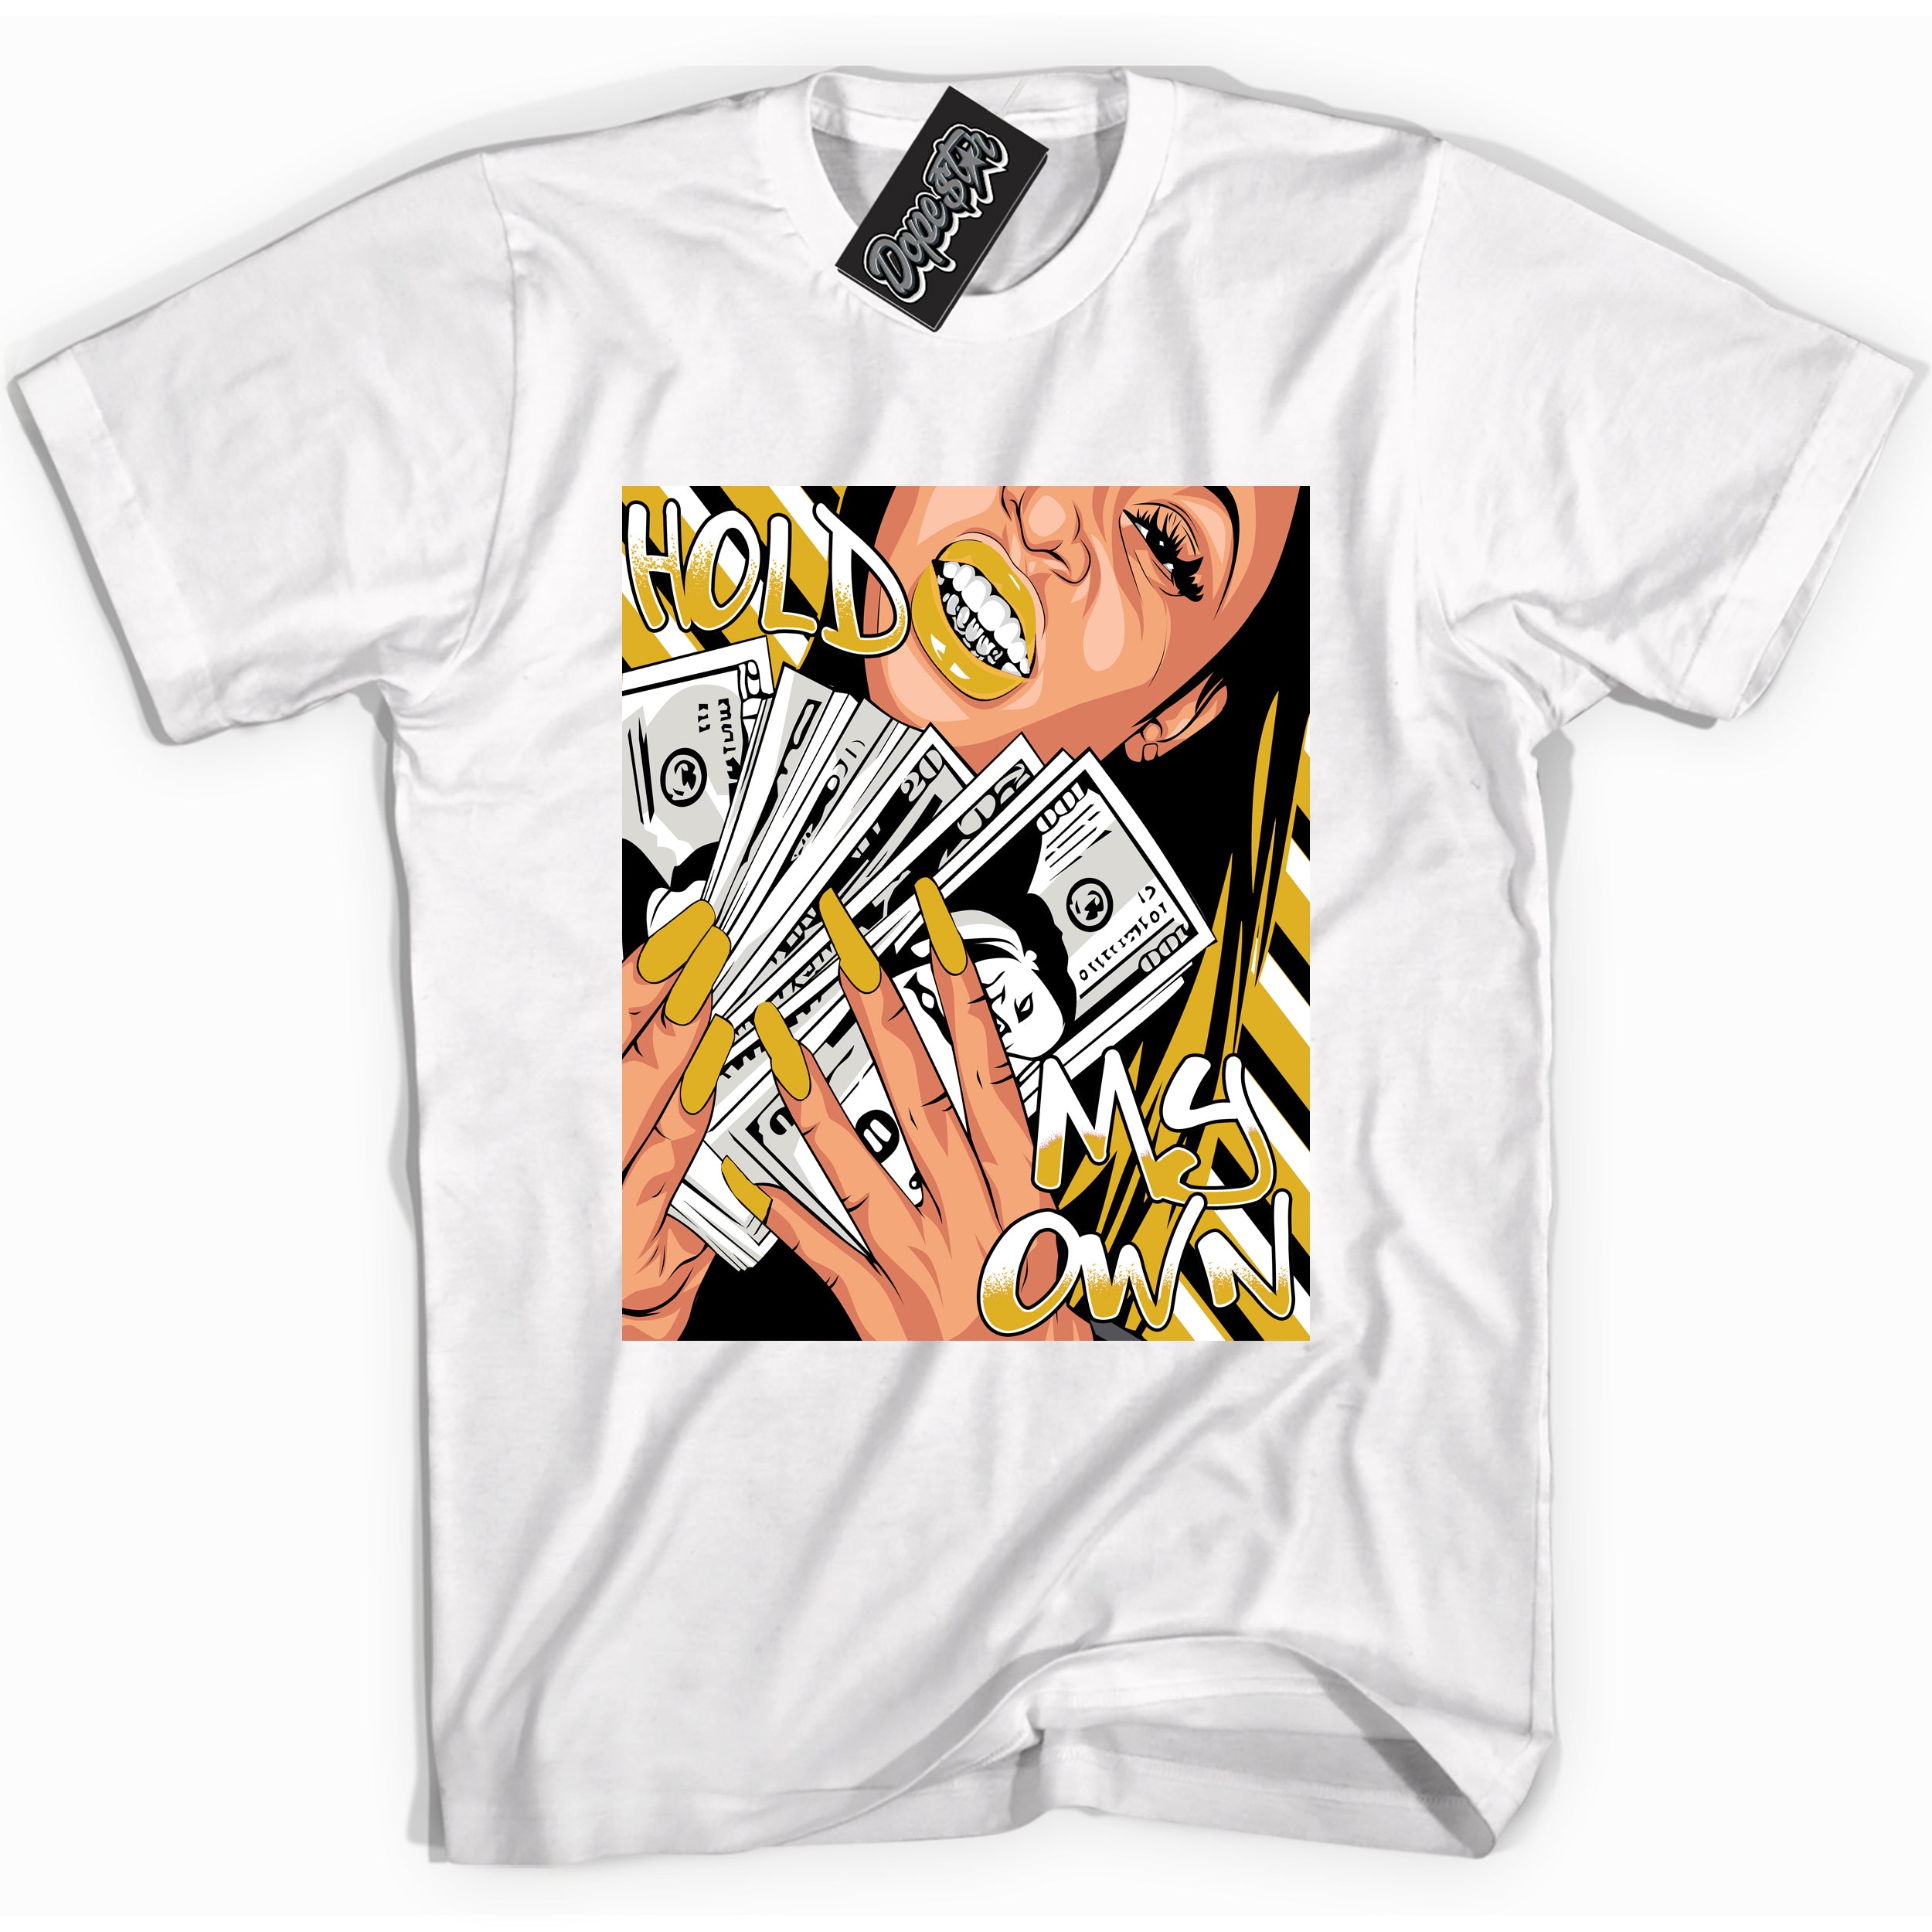 Cool White Shirt with “ Hold My Own” design that perfectly matches Yellow Ochre 6s Sneakers.